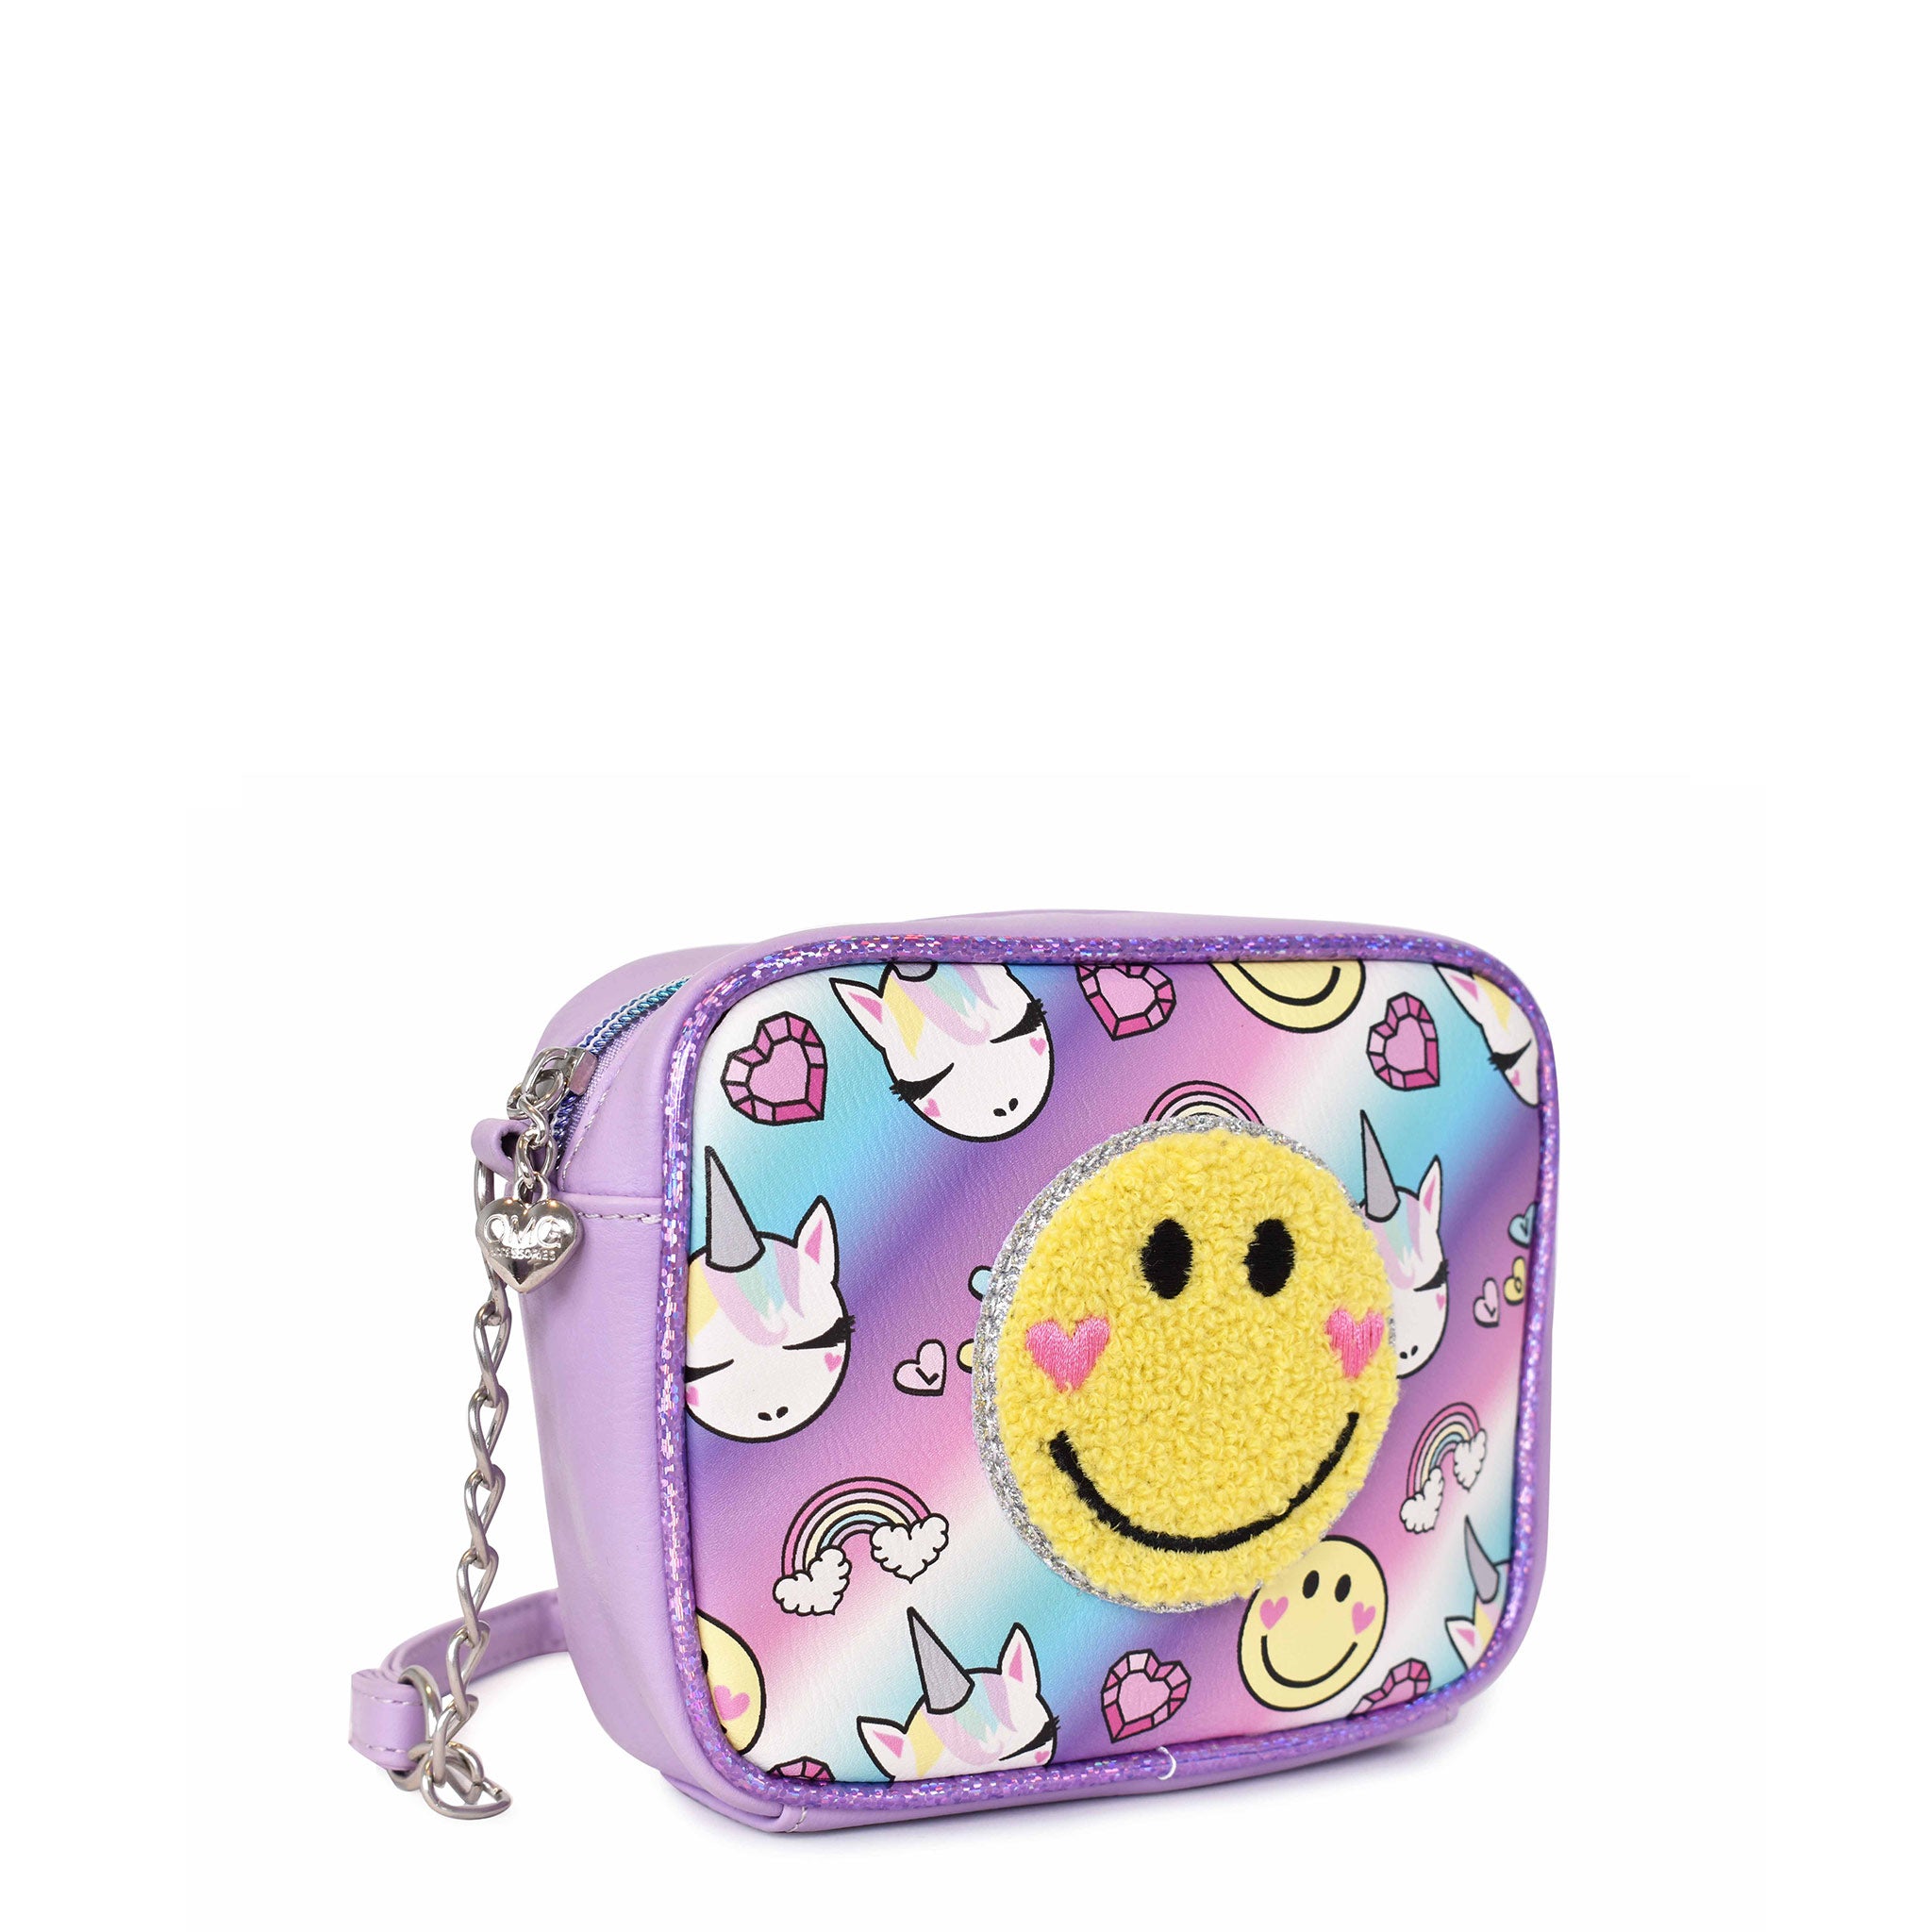 Sideview of a unicorn and rainbow printed crossbody with a chenille happy face appliqué